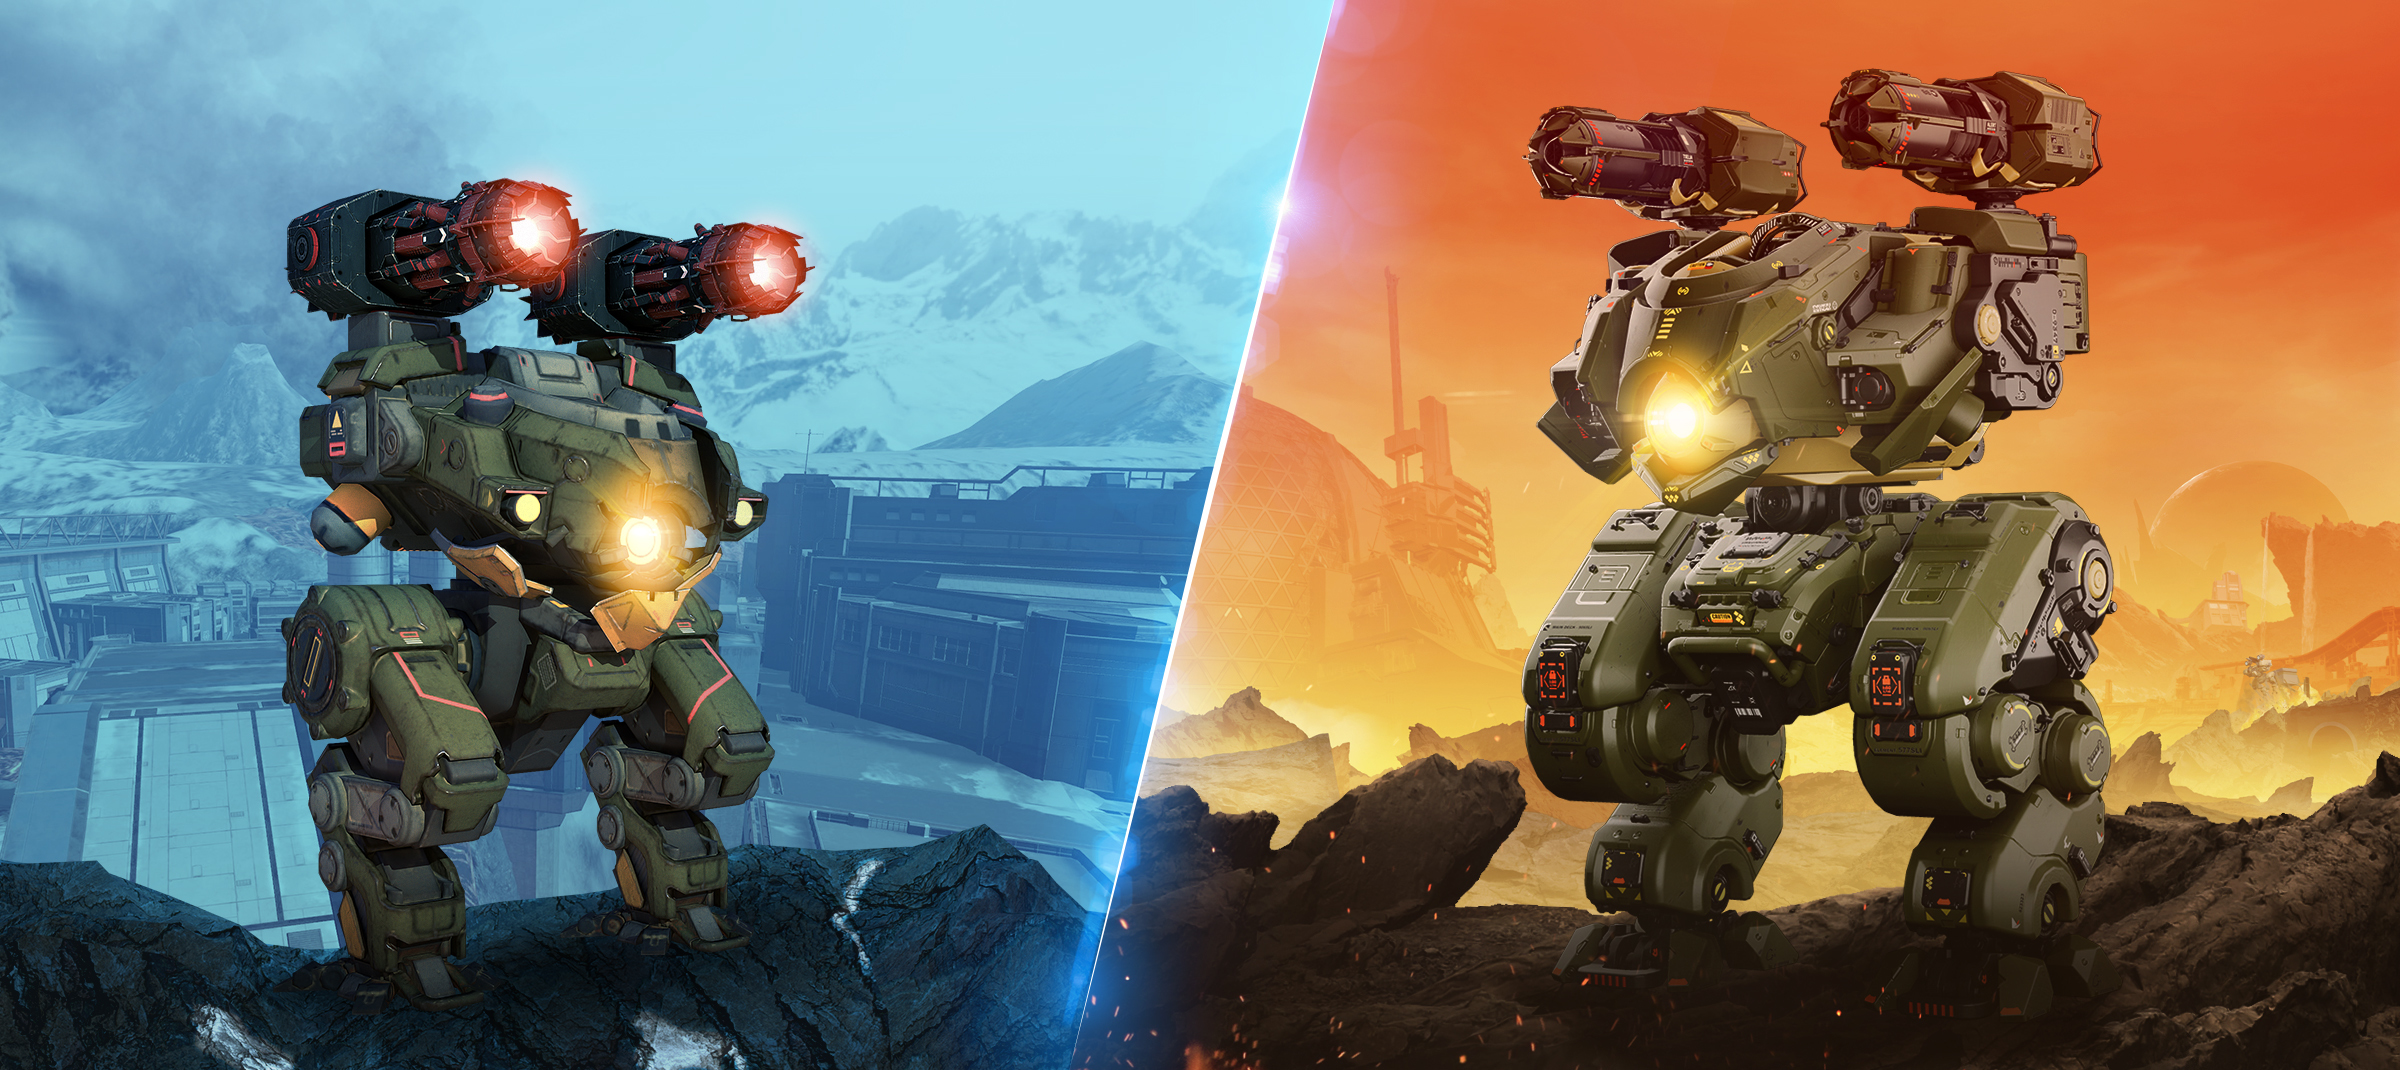 It's official: War Robots is more just one game Pixonic